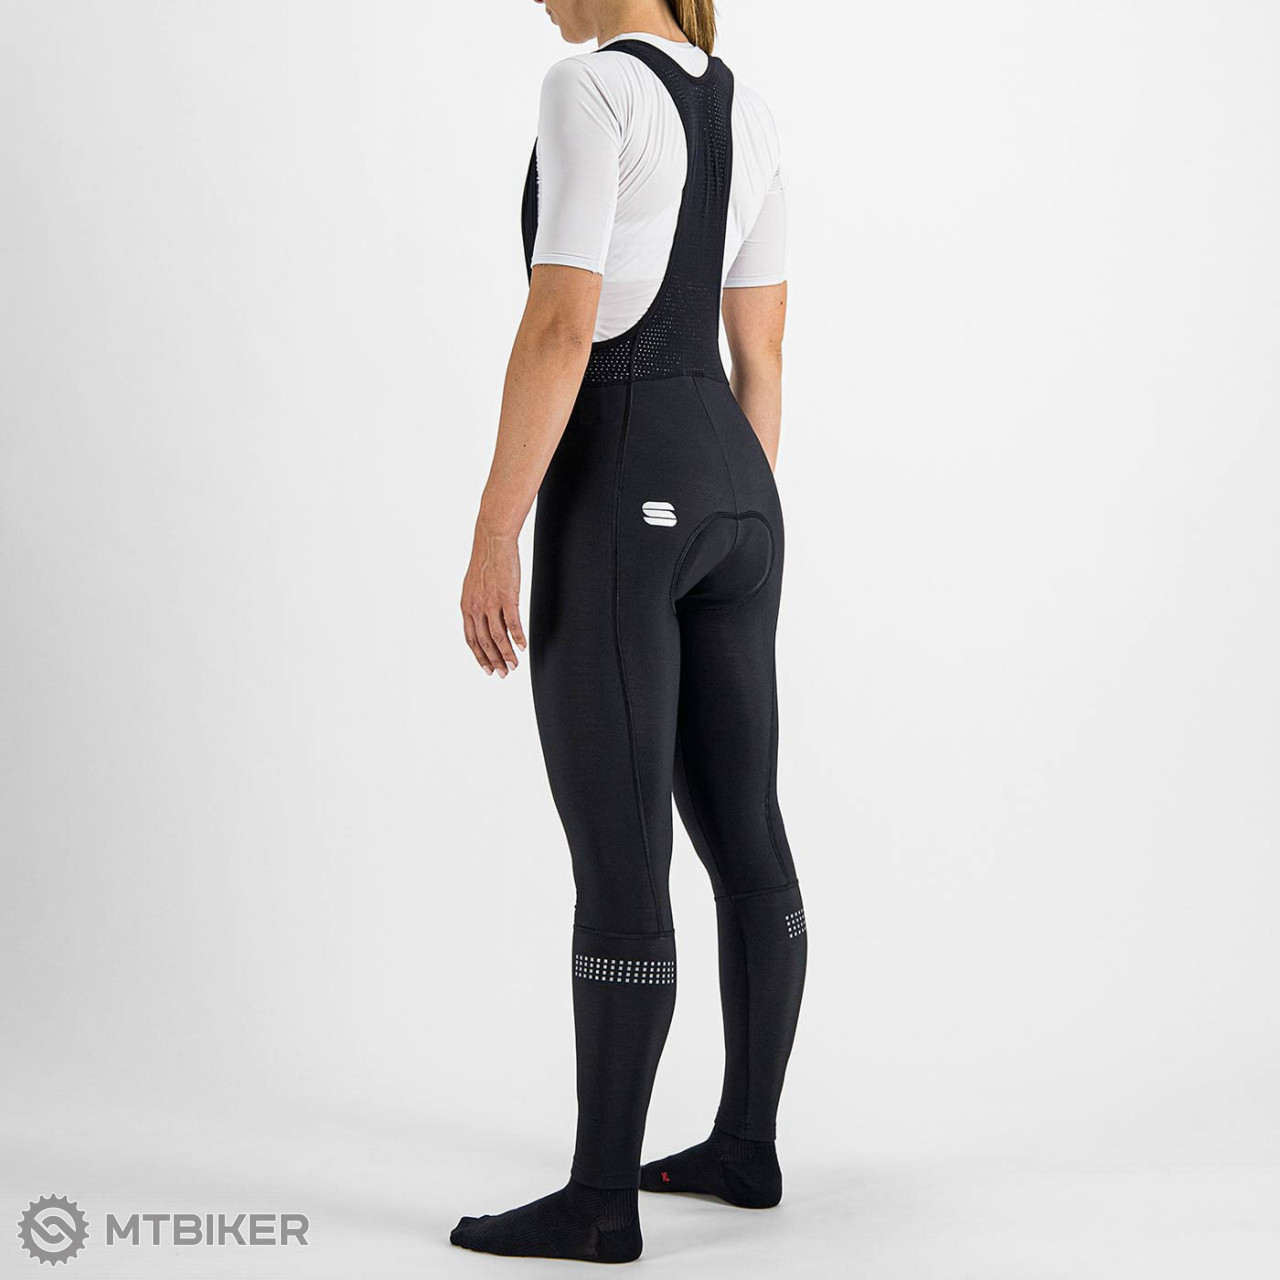 Black Hat Suspenders And Wallet Female Mannequin With White Blouse And  Black Trousers With Braces Women Clothing And Accessories Stock Photo  Picture And Royalty Free Image Image 101336233